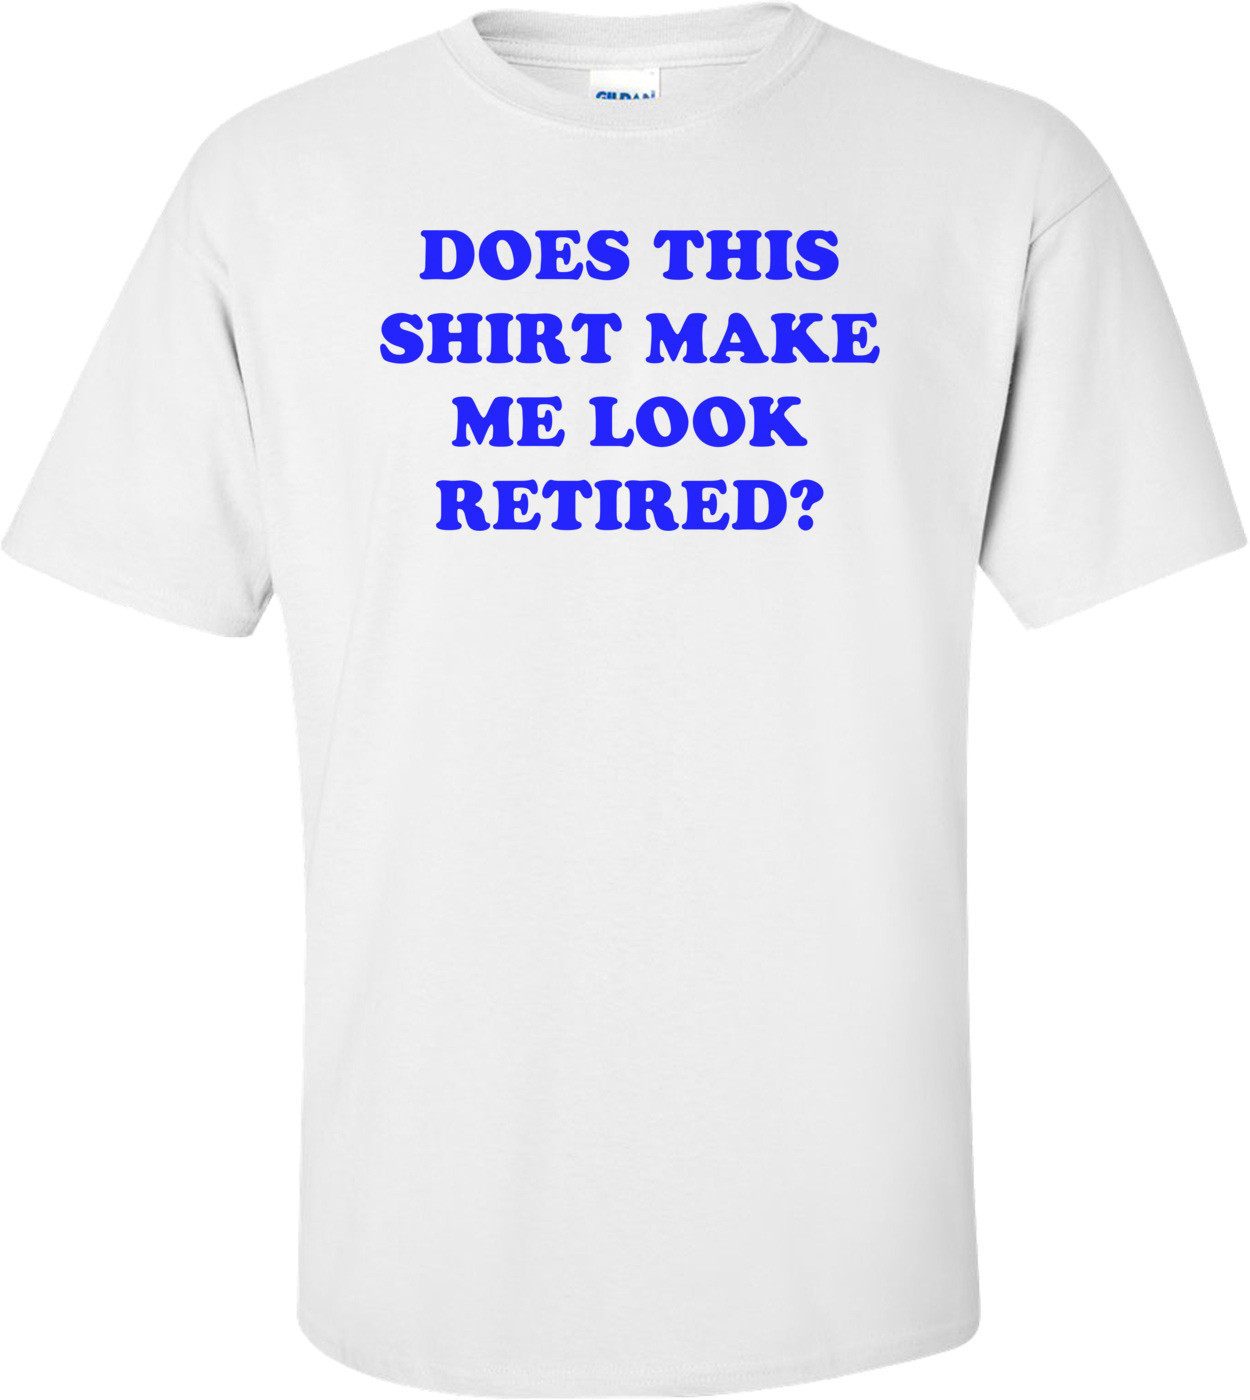 DOES THIS SHIRT MAKE ME LOOK RETIRED? Shirt